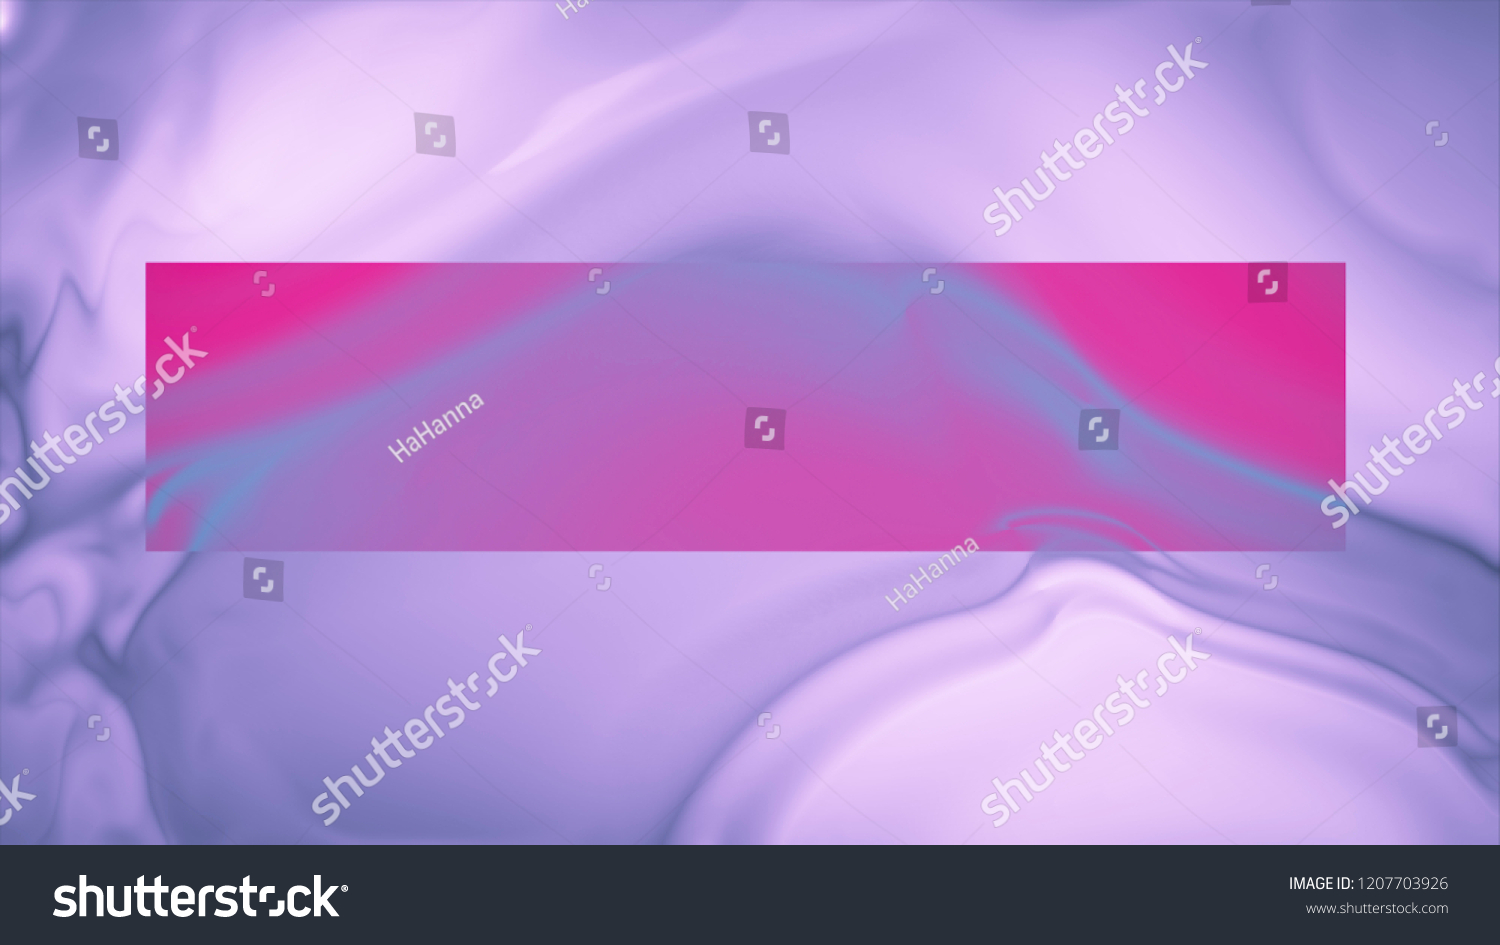 Fantastic abstract background made with copy space to display the content design or background replacement, banner to advertise the product on the website, 3d rendering
 #1207703926